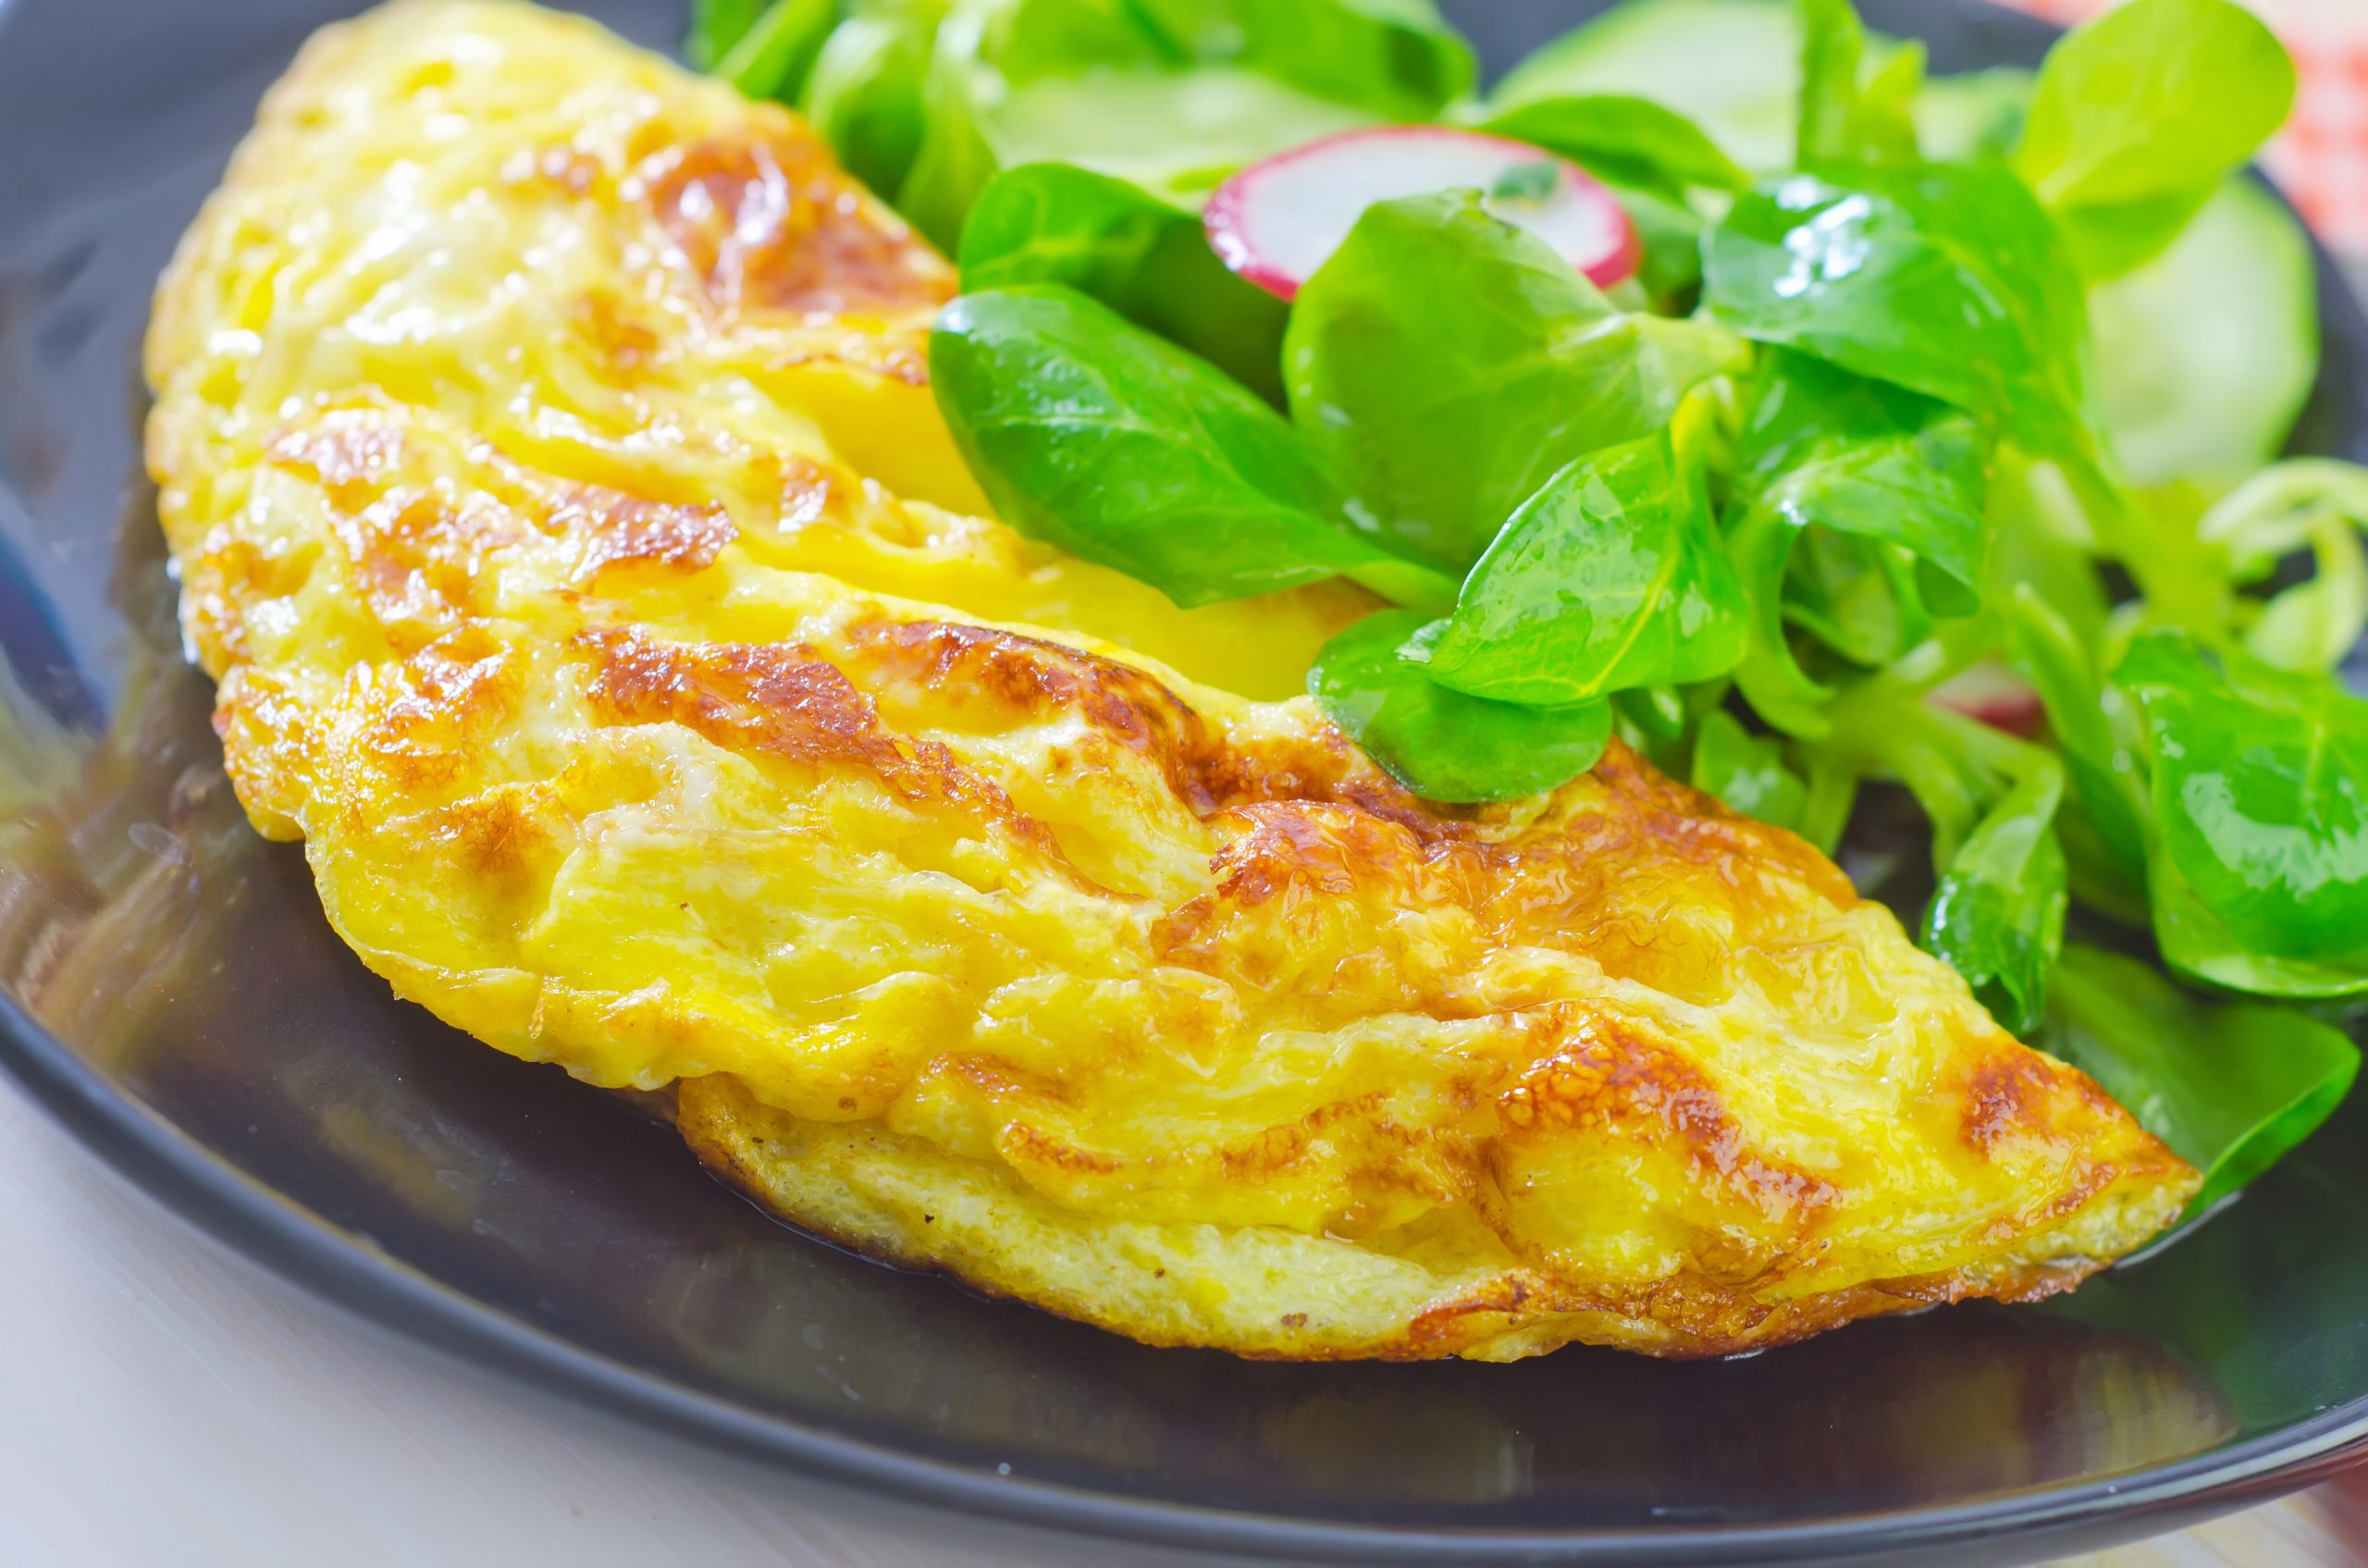 Omelet with salad